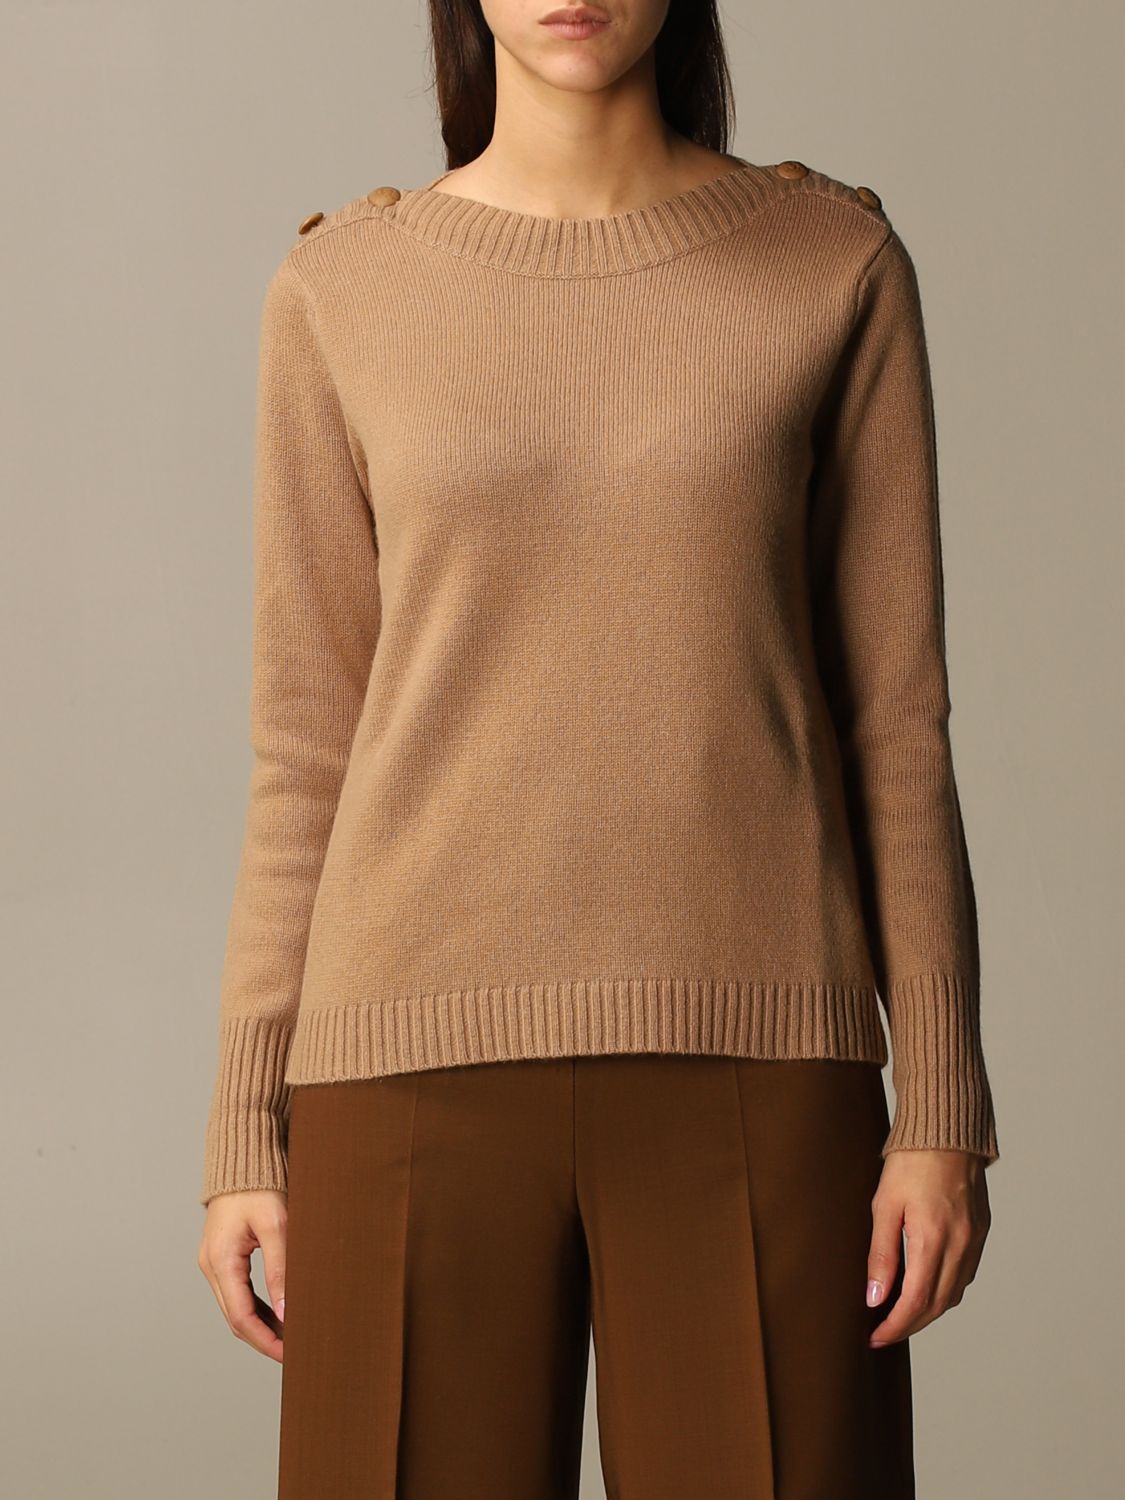 Max Mara Outlet: sweater in wool and cashmere - Camel | Max Mara